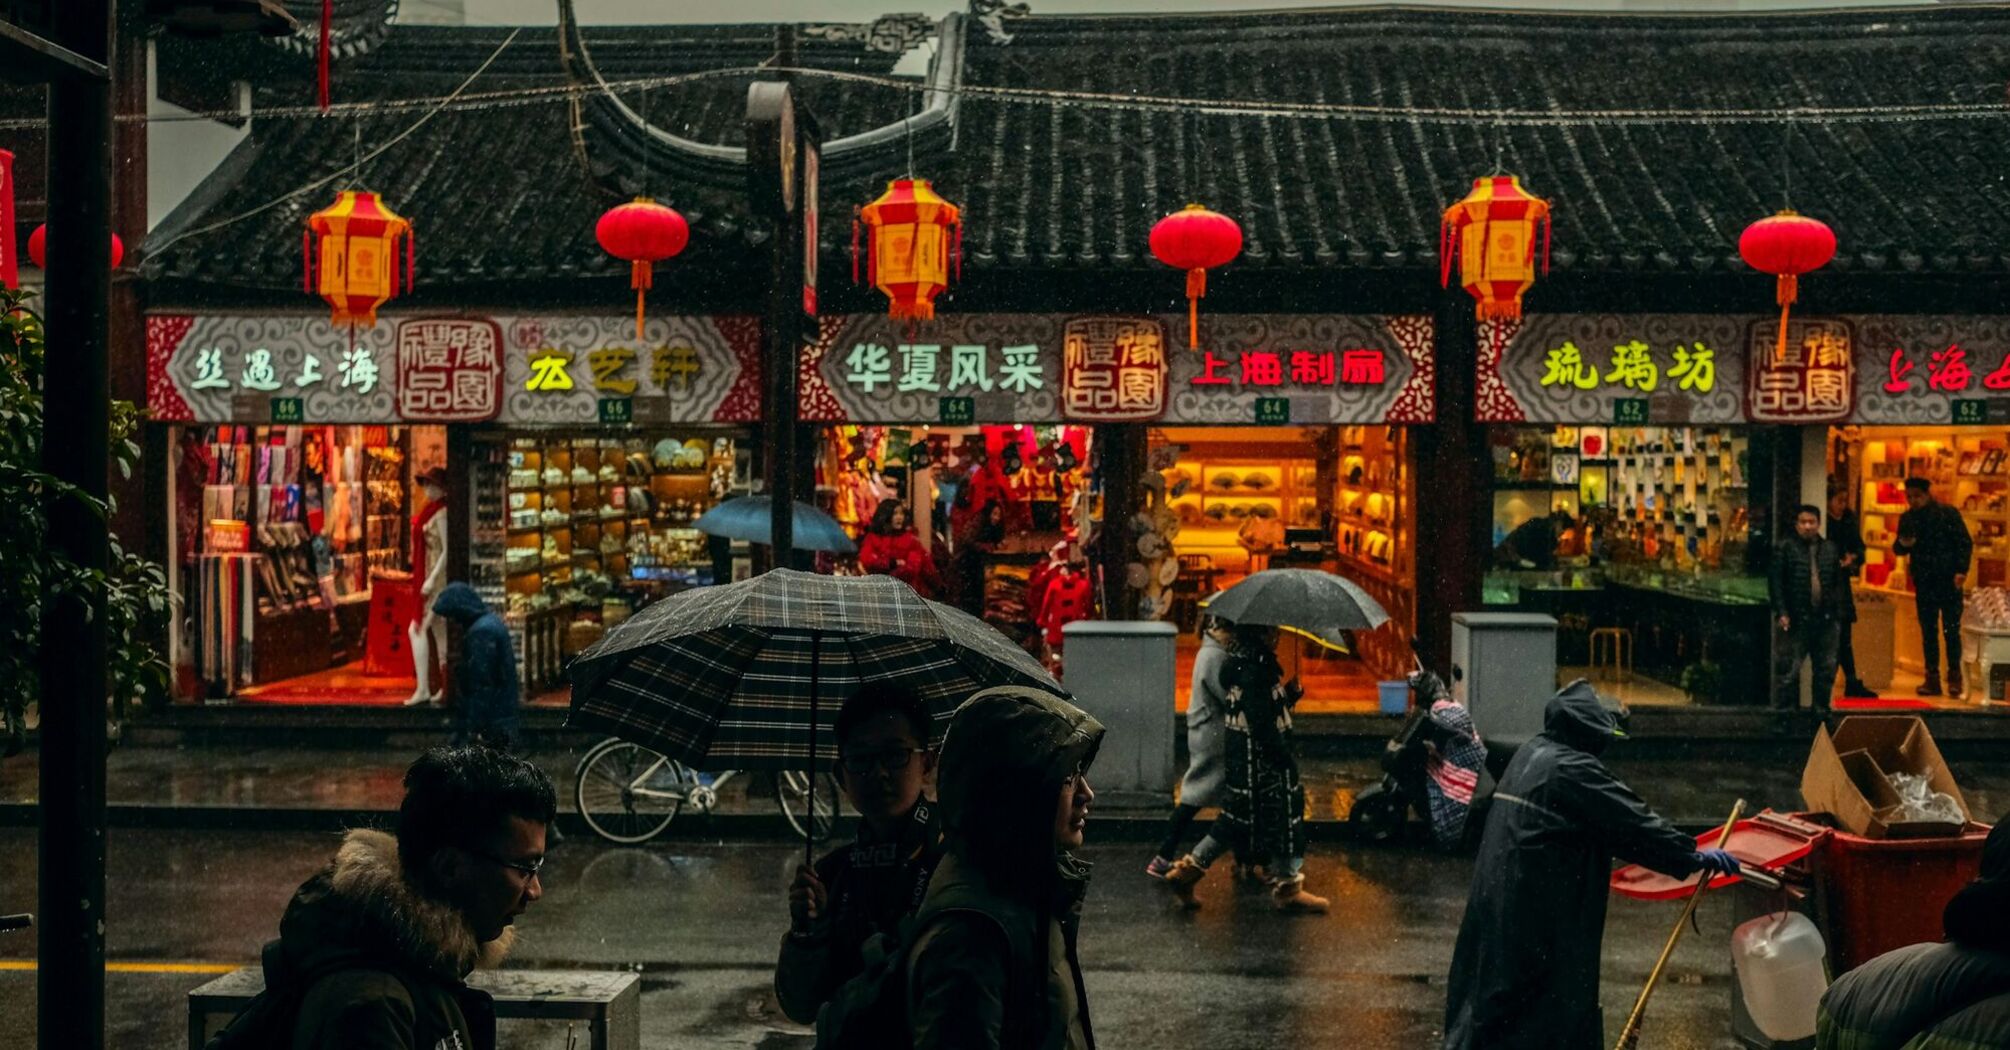 Rainy street scene in China with people holding umbrellas in front of traditional shops decorated with red lanterns